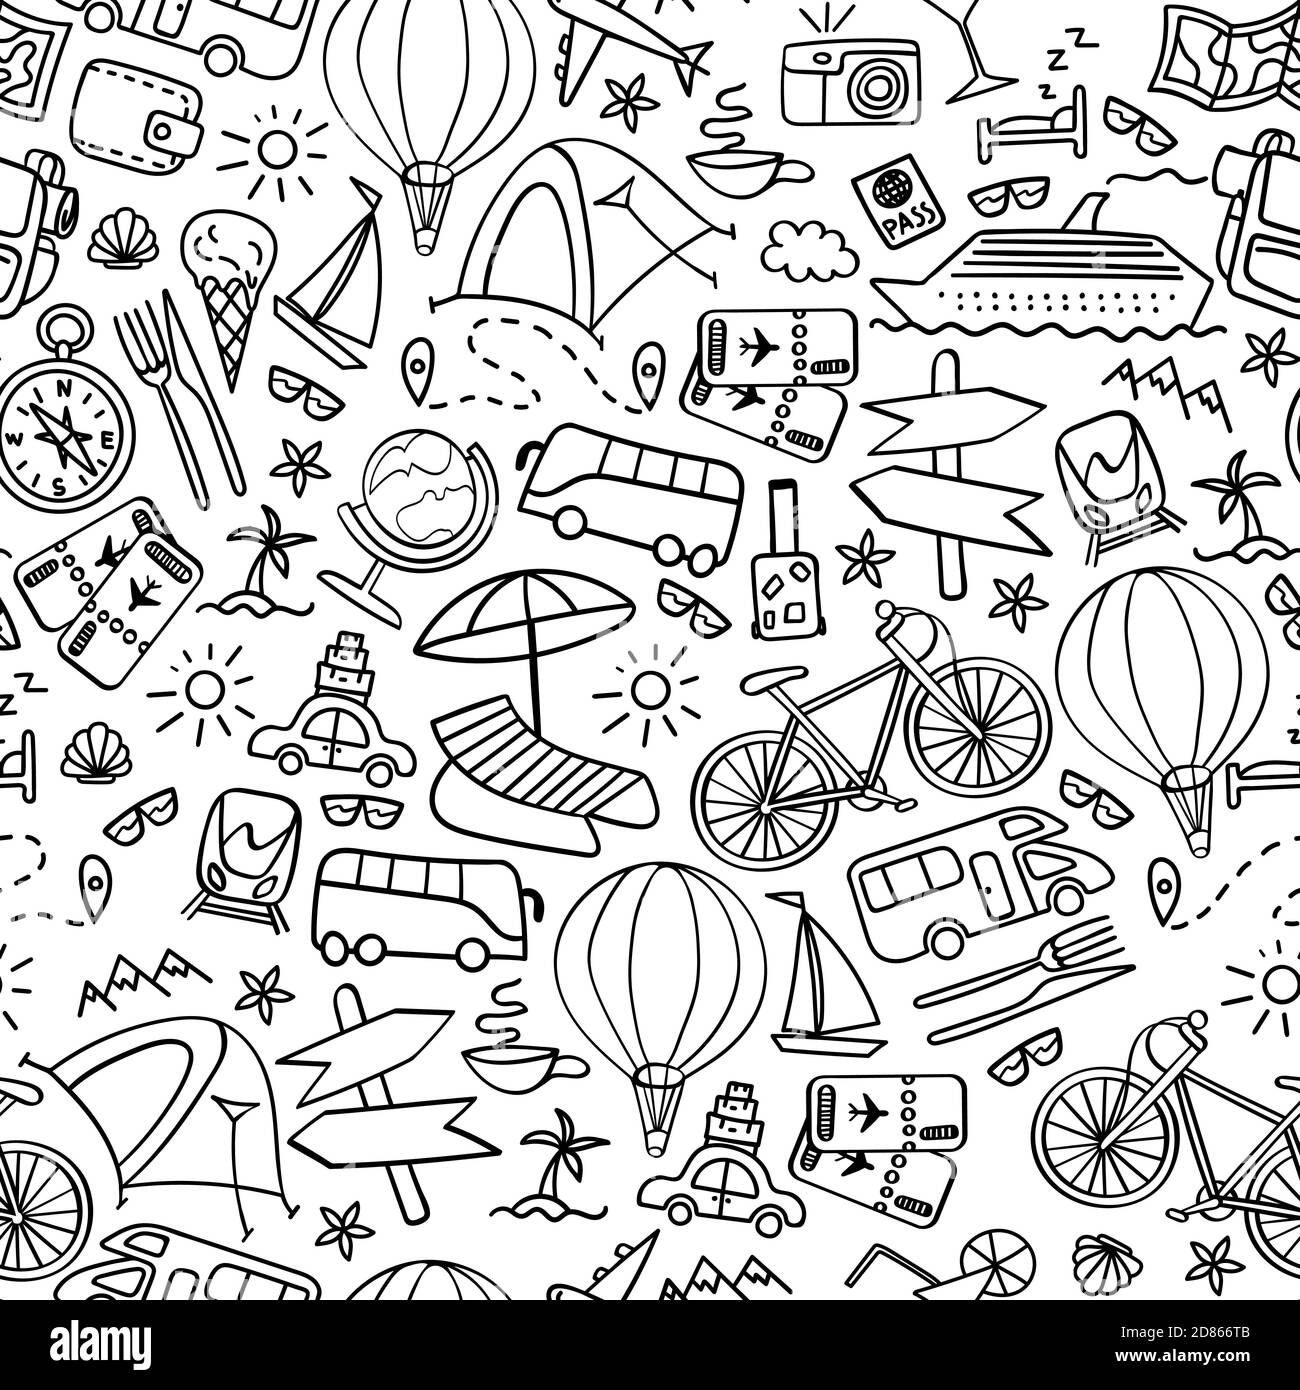 Travel doodles seamless pattern. Vacation print on white background. Vector illustration. Stock Vector